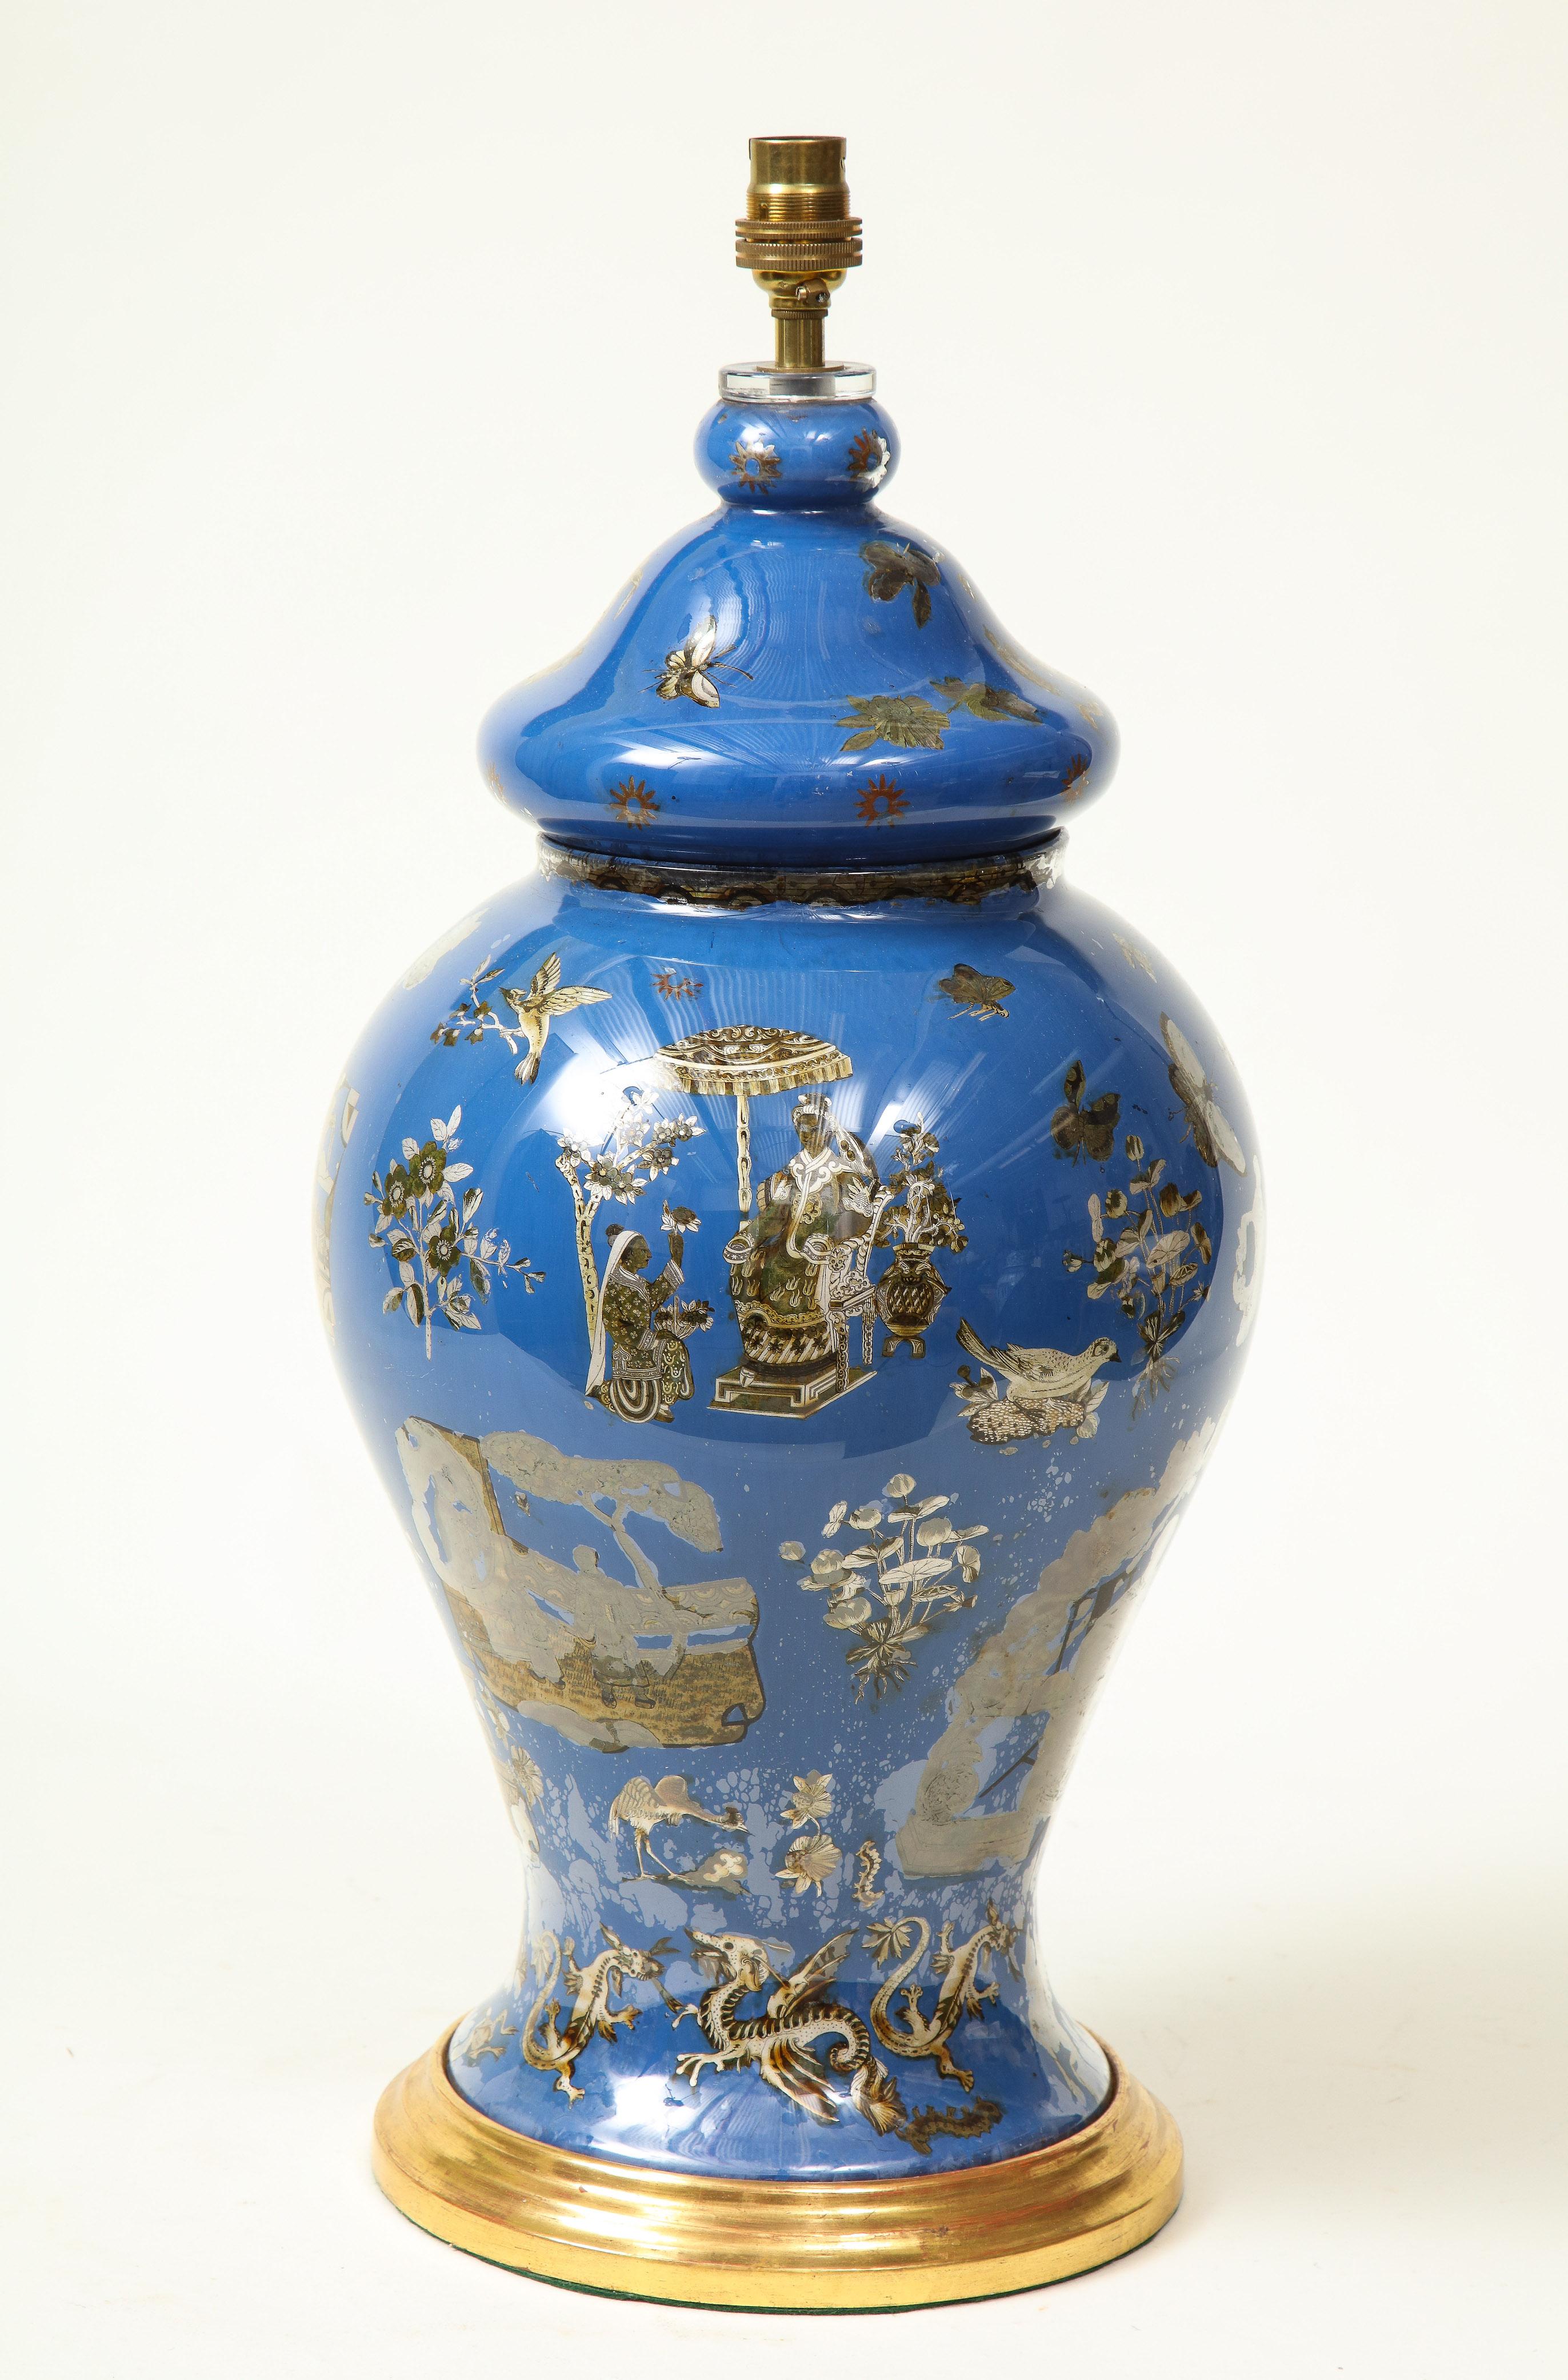 With lidded glass vase of baluster from decorated with sepia-toned Chinese court figures, butterflies, dragons, floral sprays, and more; on a turned giltwood base.

Provenance: From the Collection of Mario Buatta, New York, NY